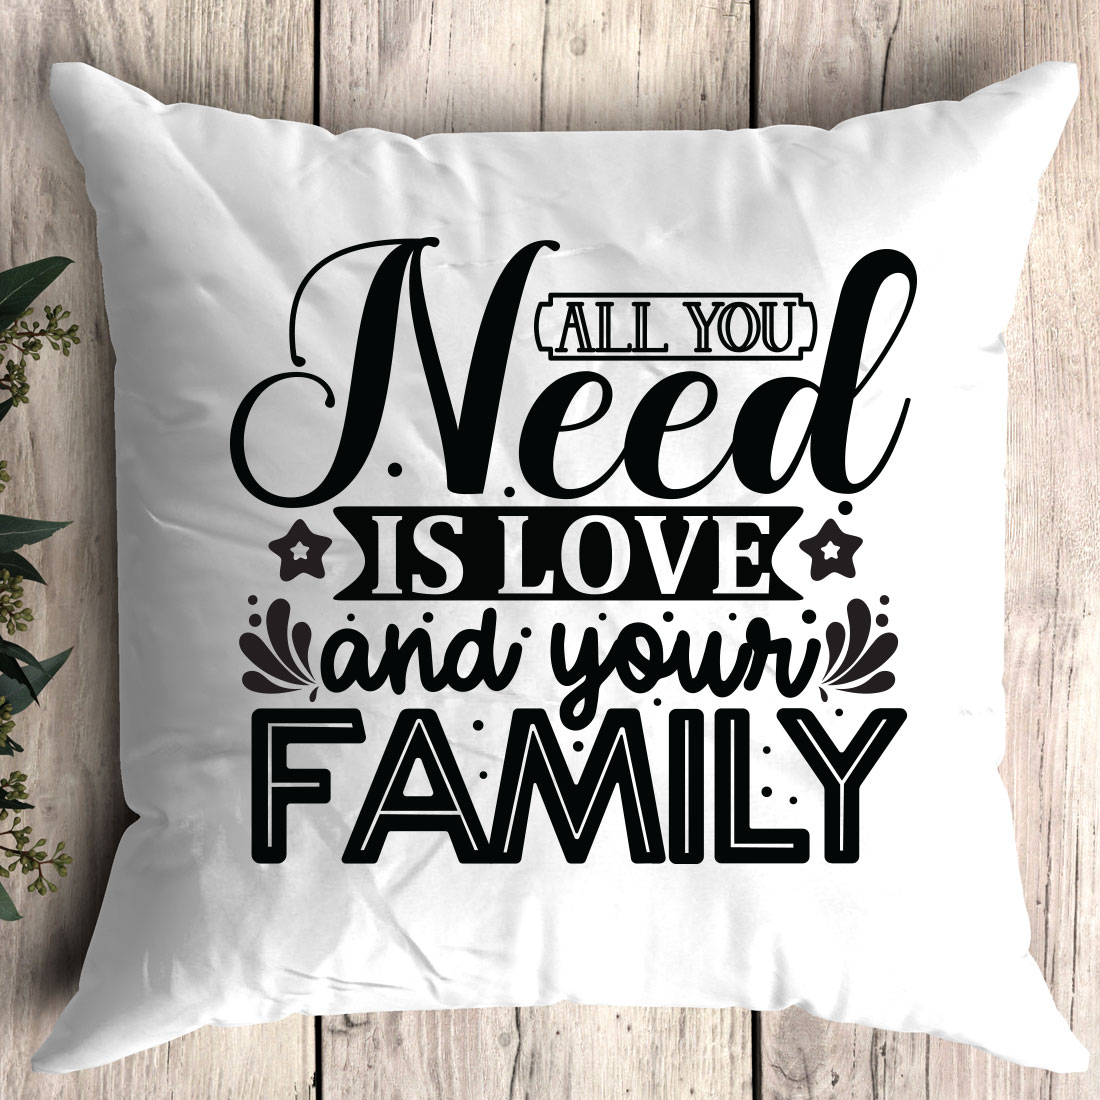 Pillow that says all you need is love and your family.